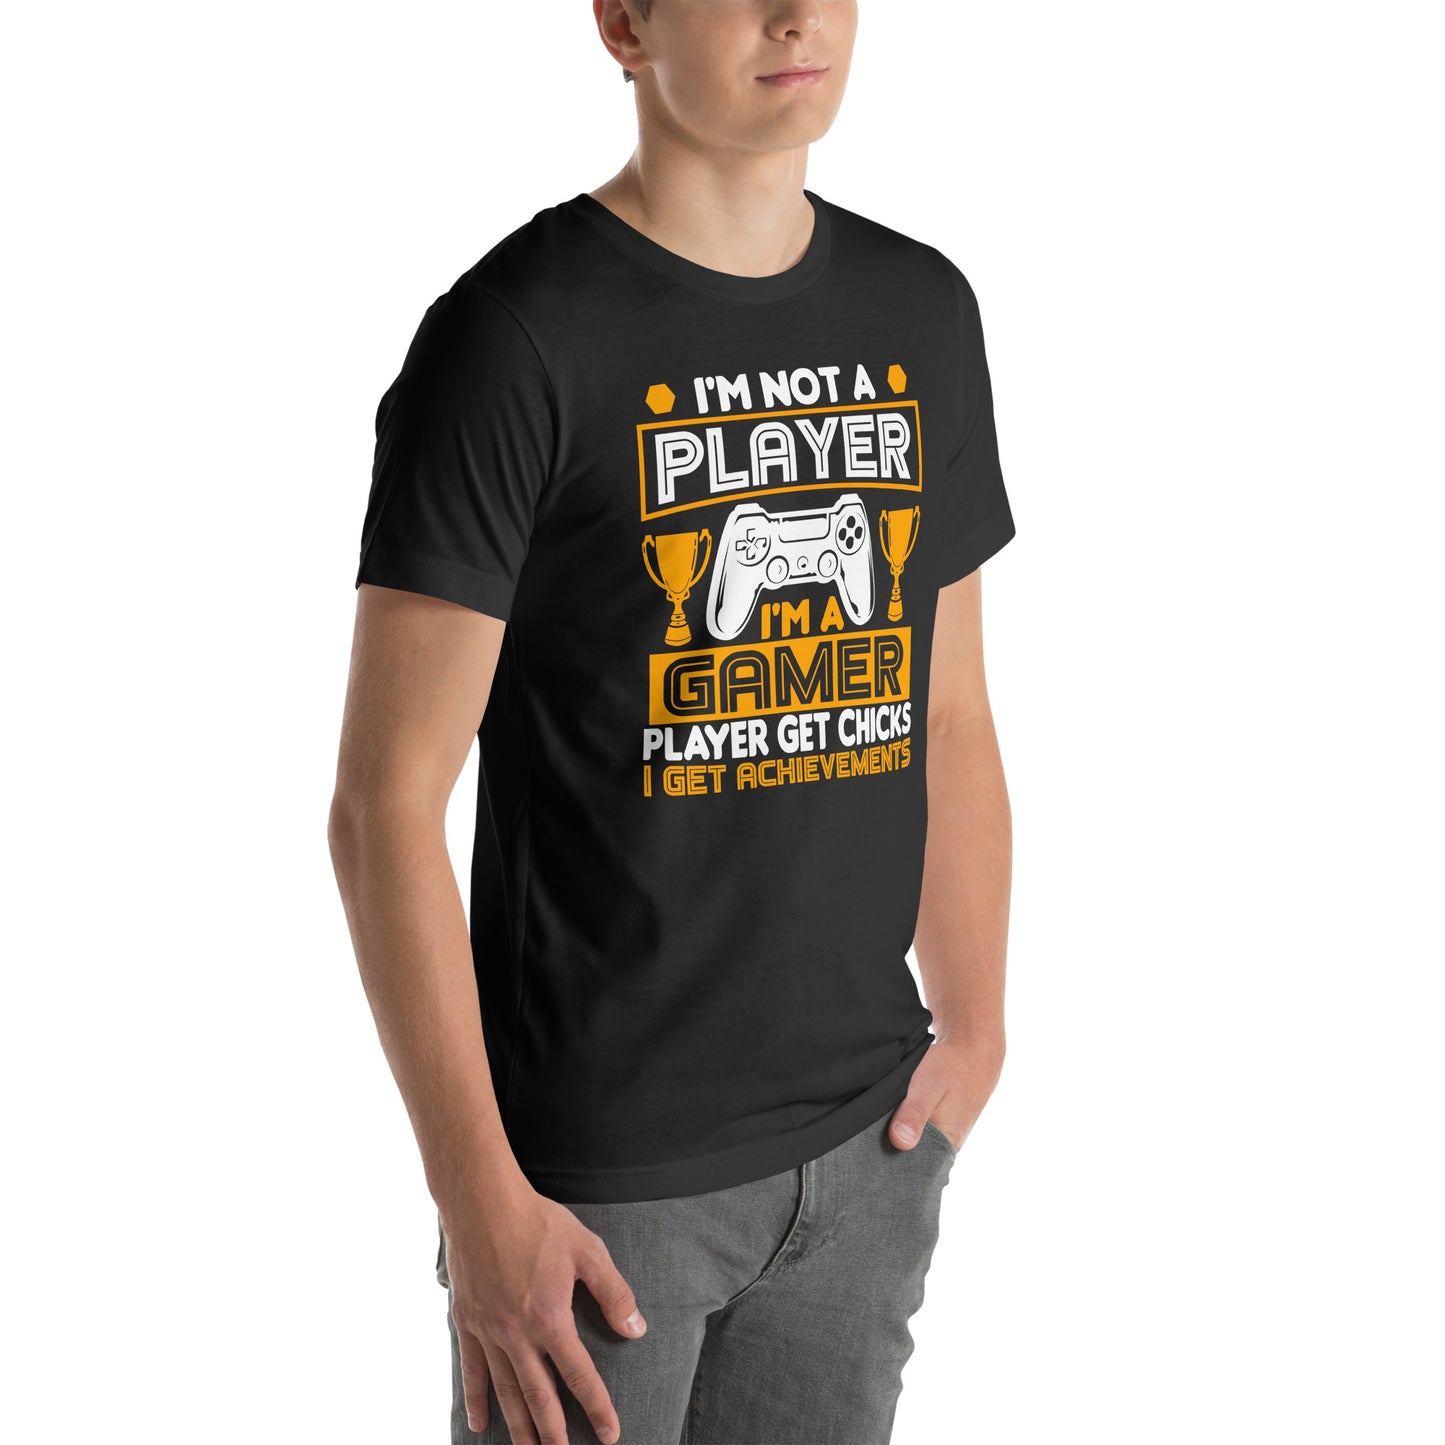 I'm Not a Player, I'm a Gamer | Unisex Casual Tee | Funny Gamer Shirt